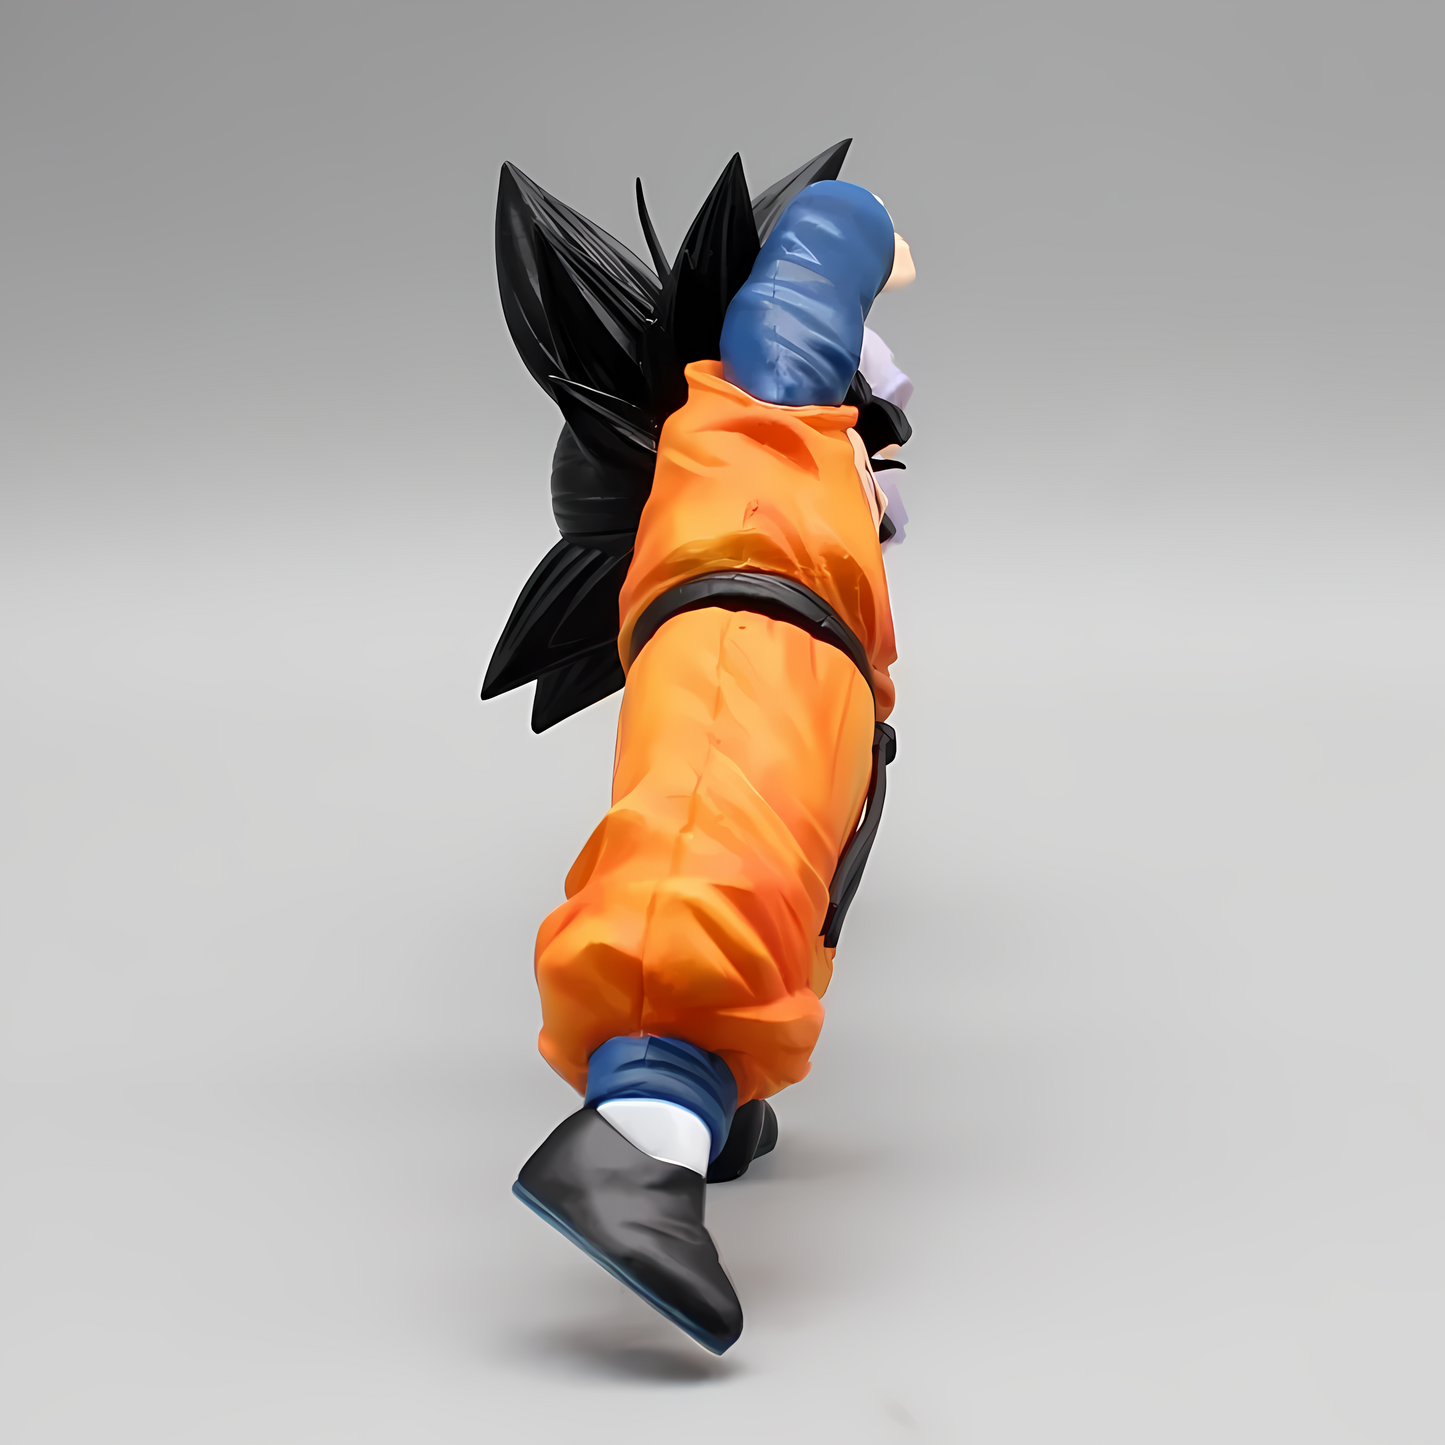 Dragon Ball collectible figure of Goten and Trunks, positioned head-to-head in the fusion dance, a dramatic representation of their powerful bond and unity.